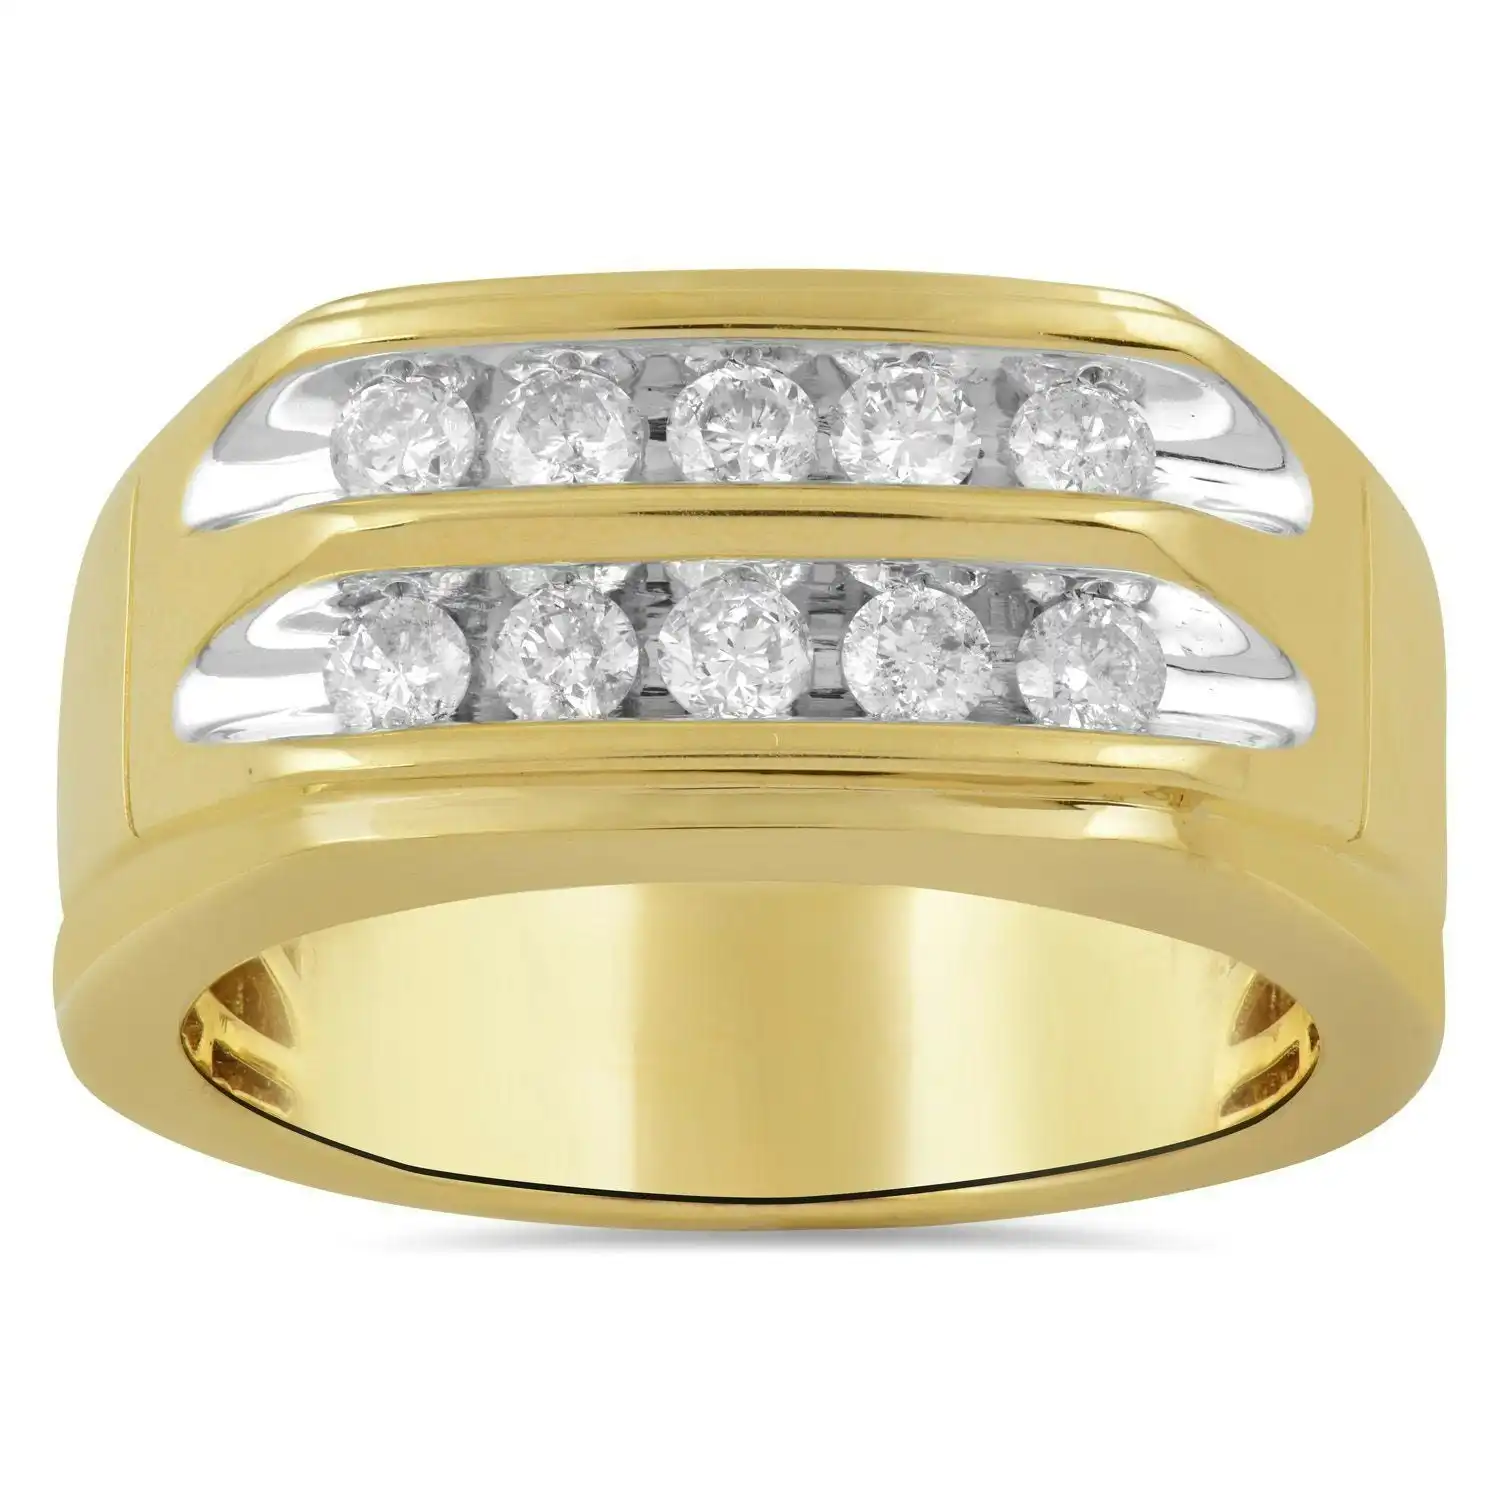 Channel Men's Ring with 3/4ct of Diamonds in 9ct Yellow Gold